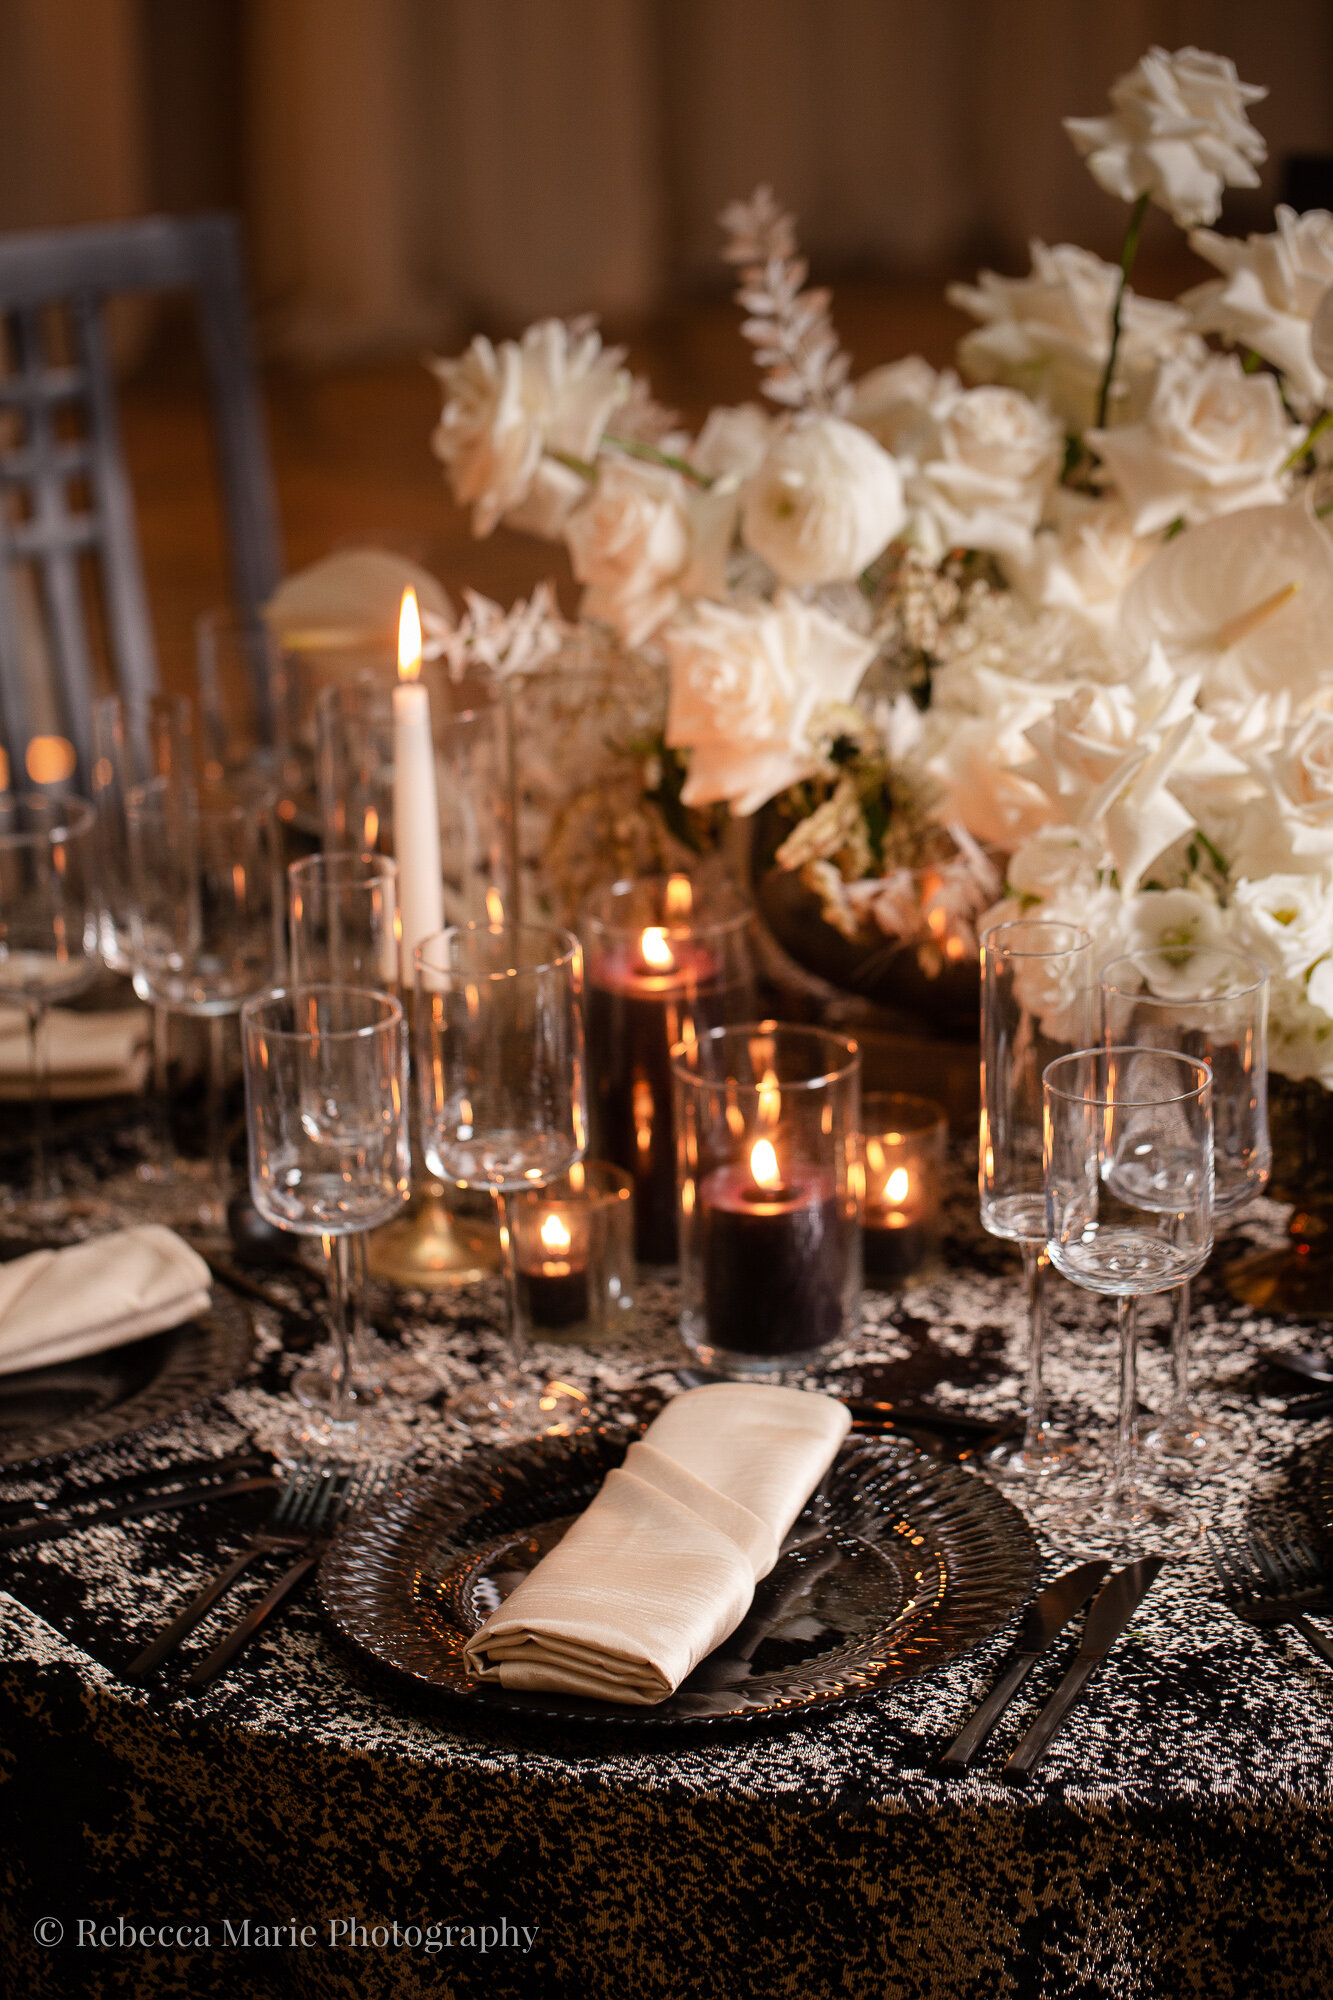 4 Simple Ways to Elevate Your Wedding Reception Look